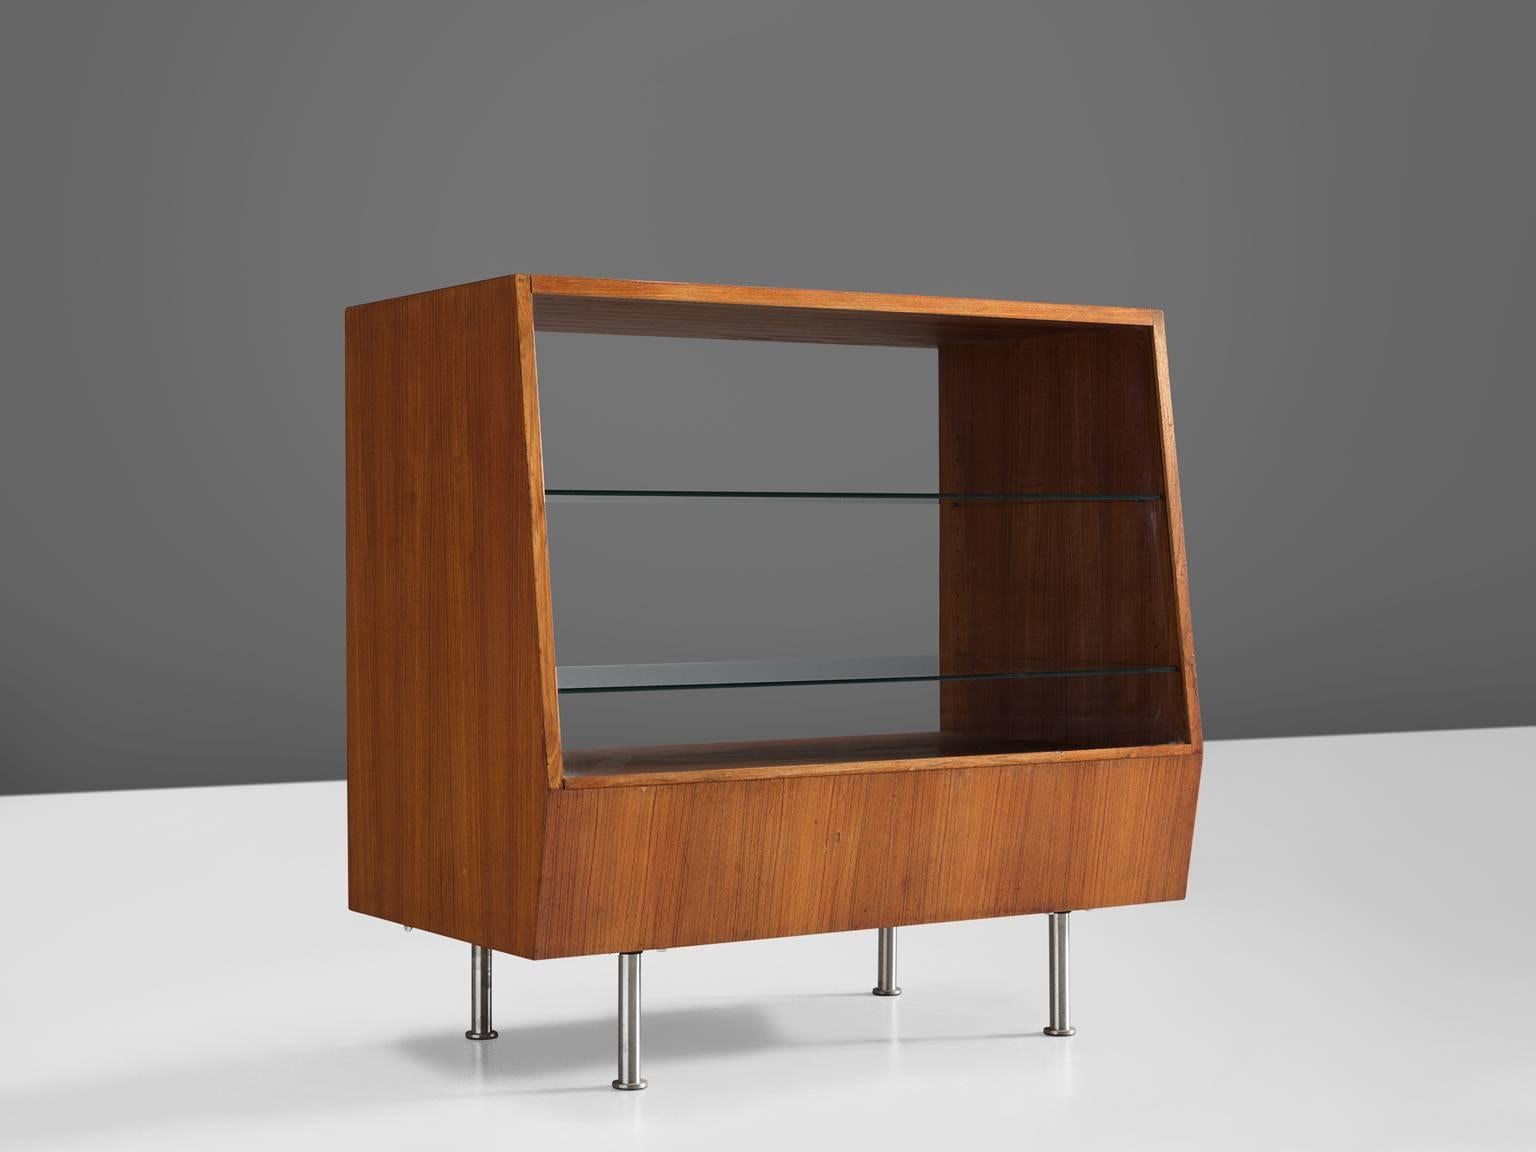 Vitrine, wood, steel, Denmark, 1960s.

Elegant and geometric showcase in teak. The front features a slight triangle when seen from the side, resulting in a large bottom shelf. The base of this vitrine is beautifully simply designed by means of four